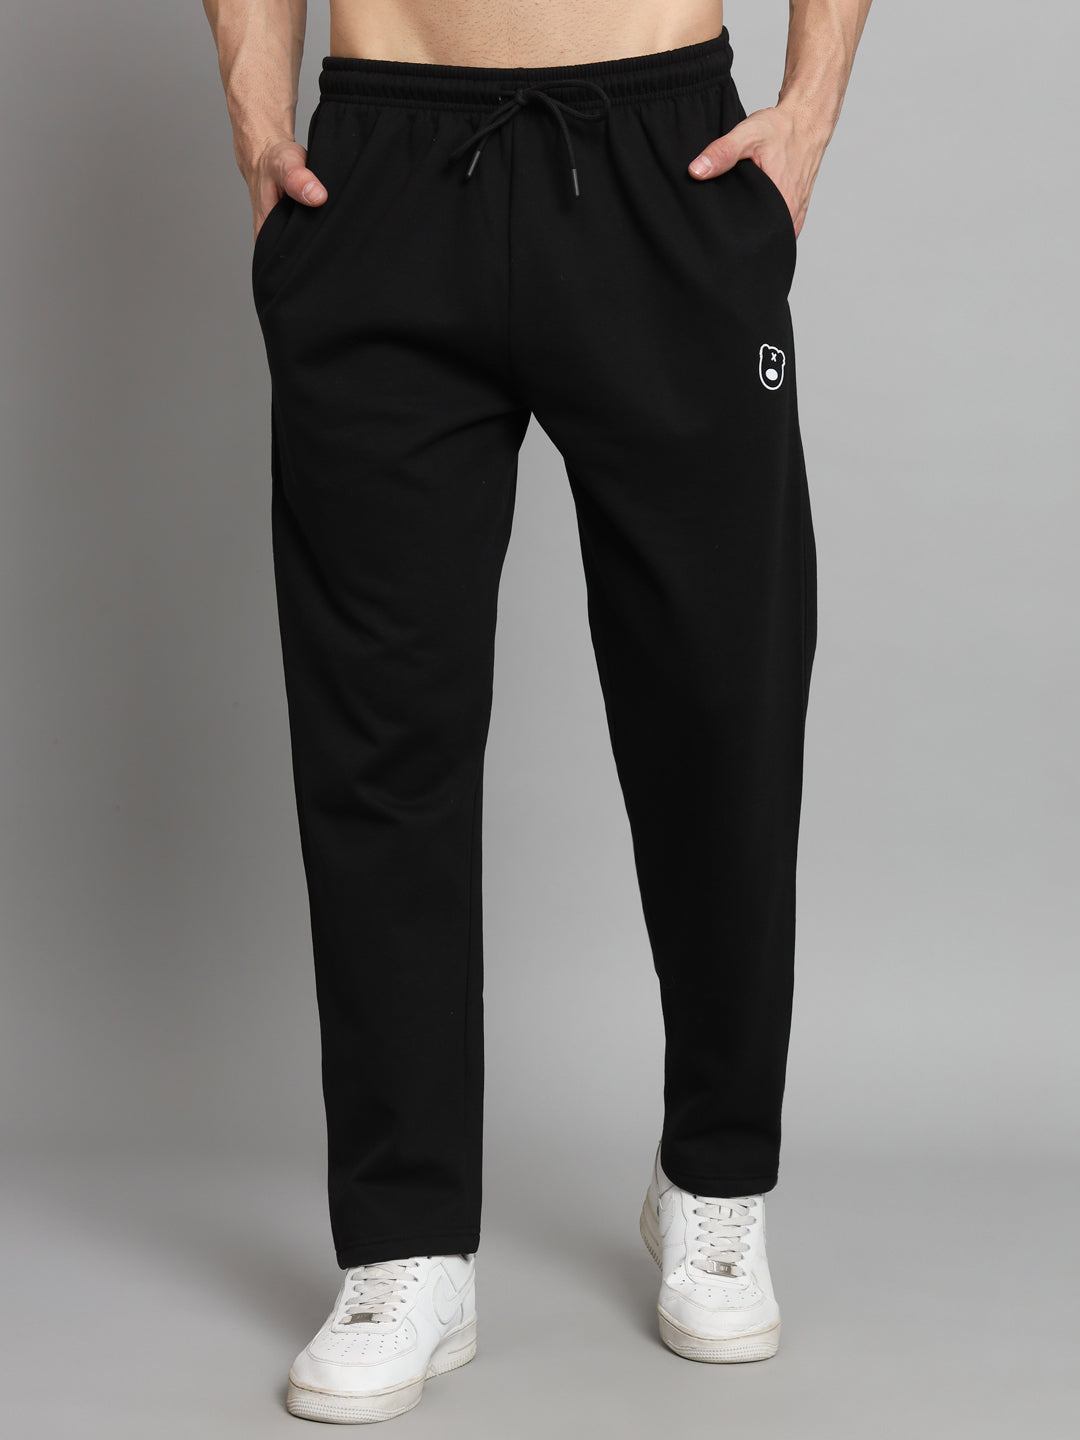 Attractive Track Pant | Gym Track Pant For Men | Gym Wear | Gym track pants,  Men gym wear, Gym wear